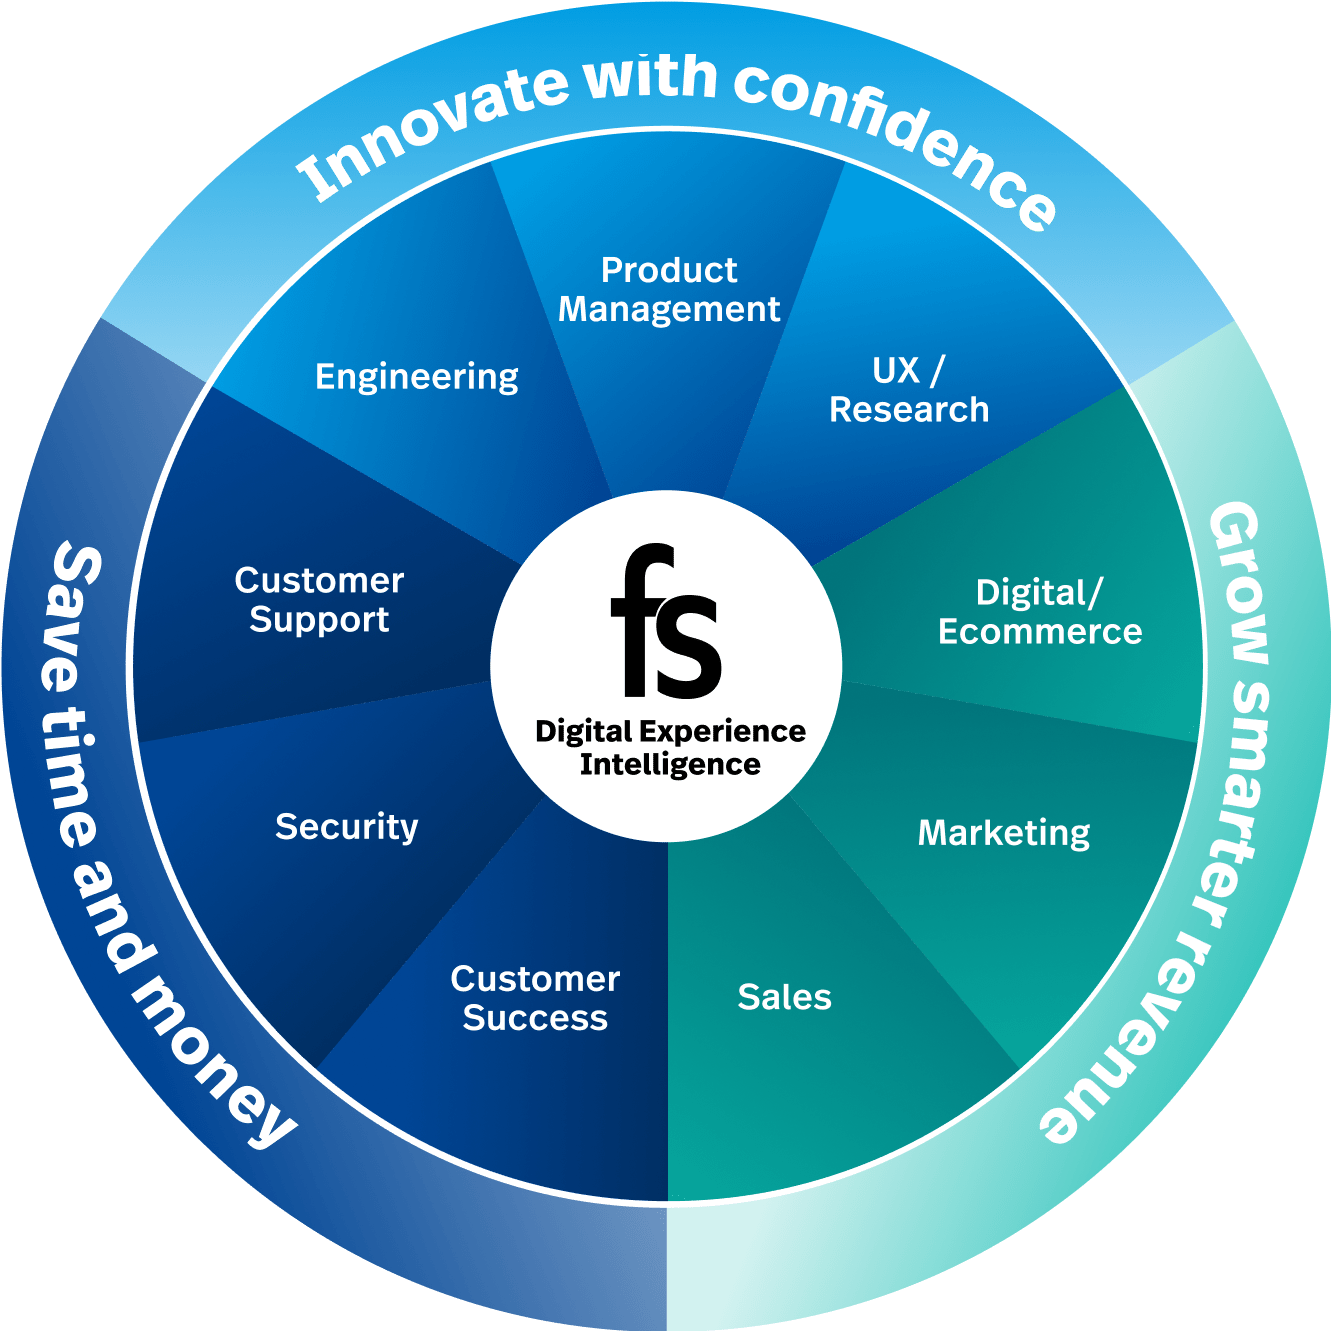 With FullStory Digital Experience Intelligence. Innovate with confidence: Engineering, Product Management, UX/Research. Grow smarter revenue: Sales, Marketing, Digital/Ecommerce. Save time and money: Customer Support, Security, Customer Success.